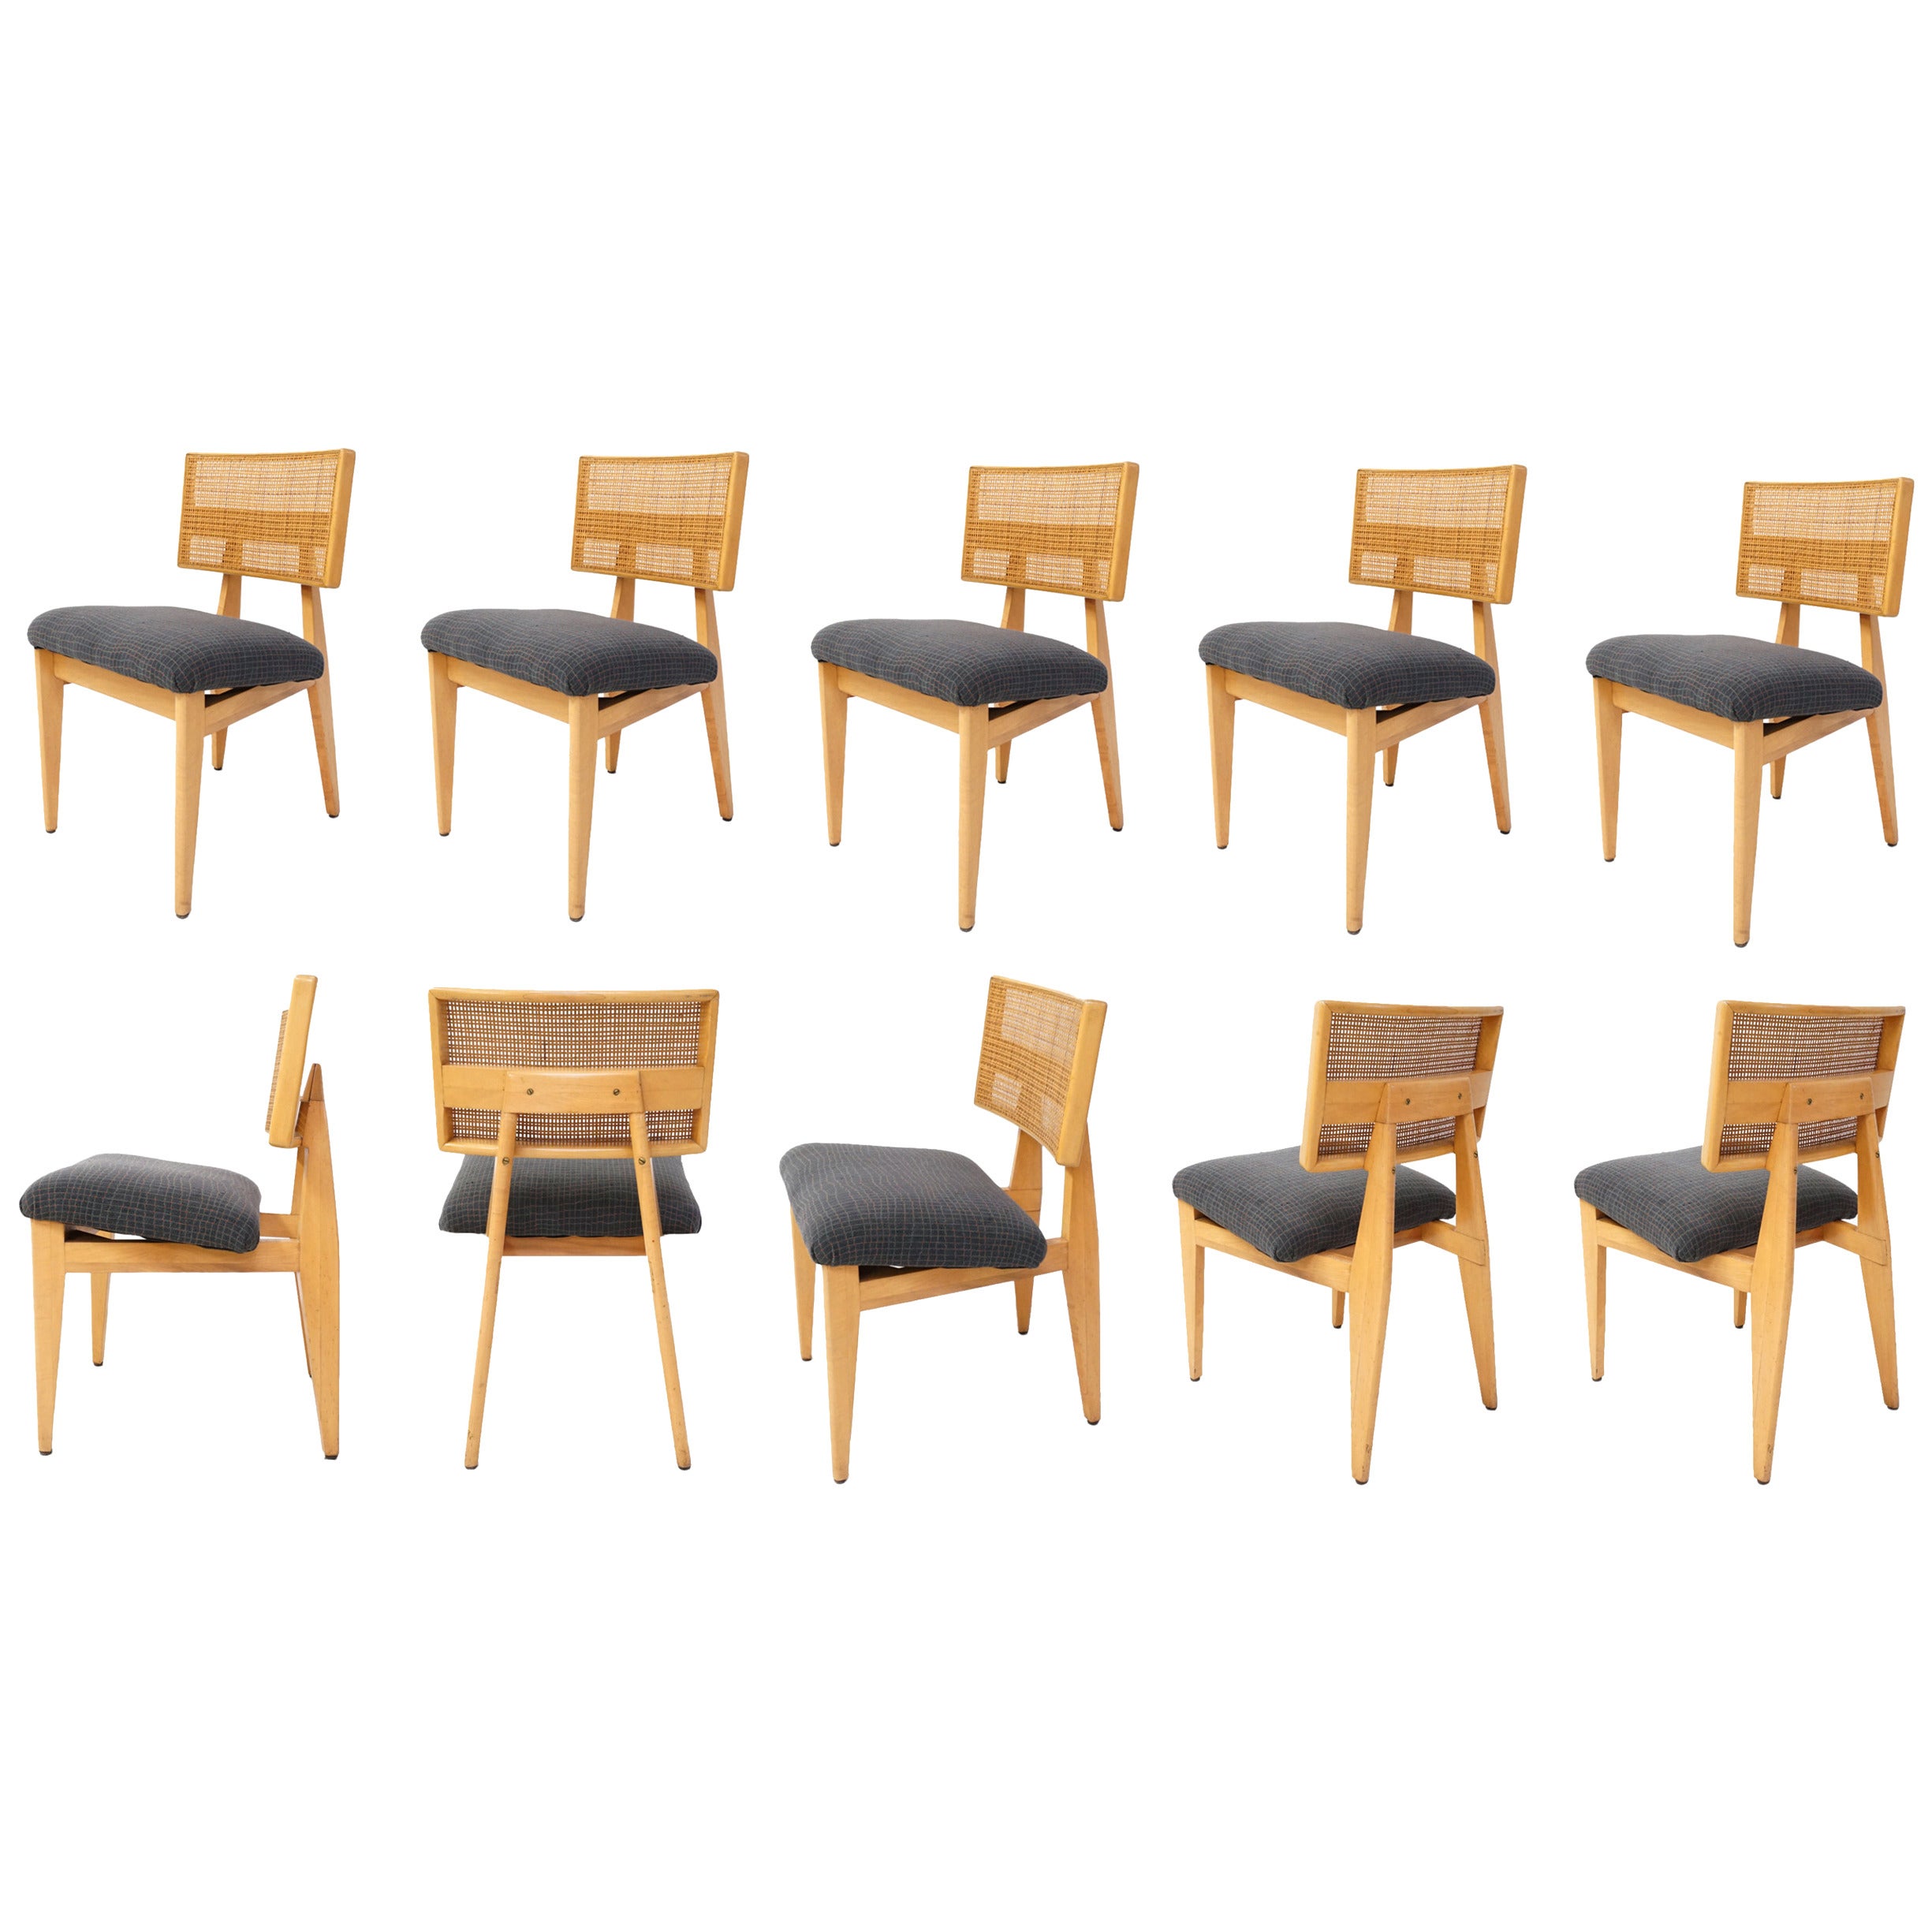 10 Rare George Nelson Dining Chairs all Original from 1956